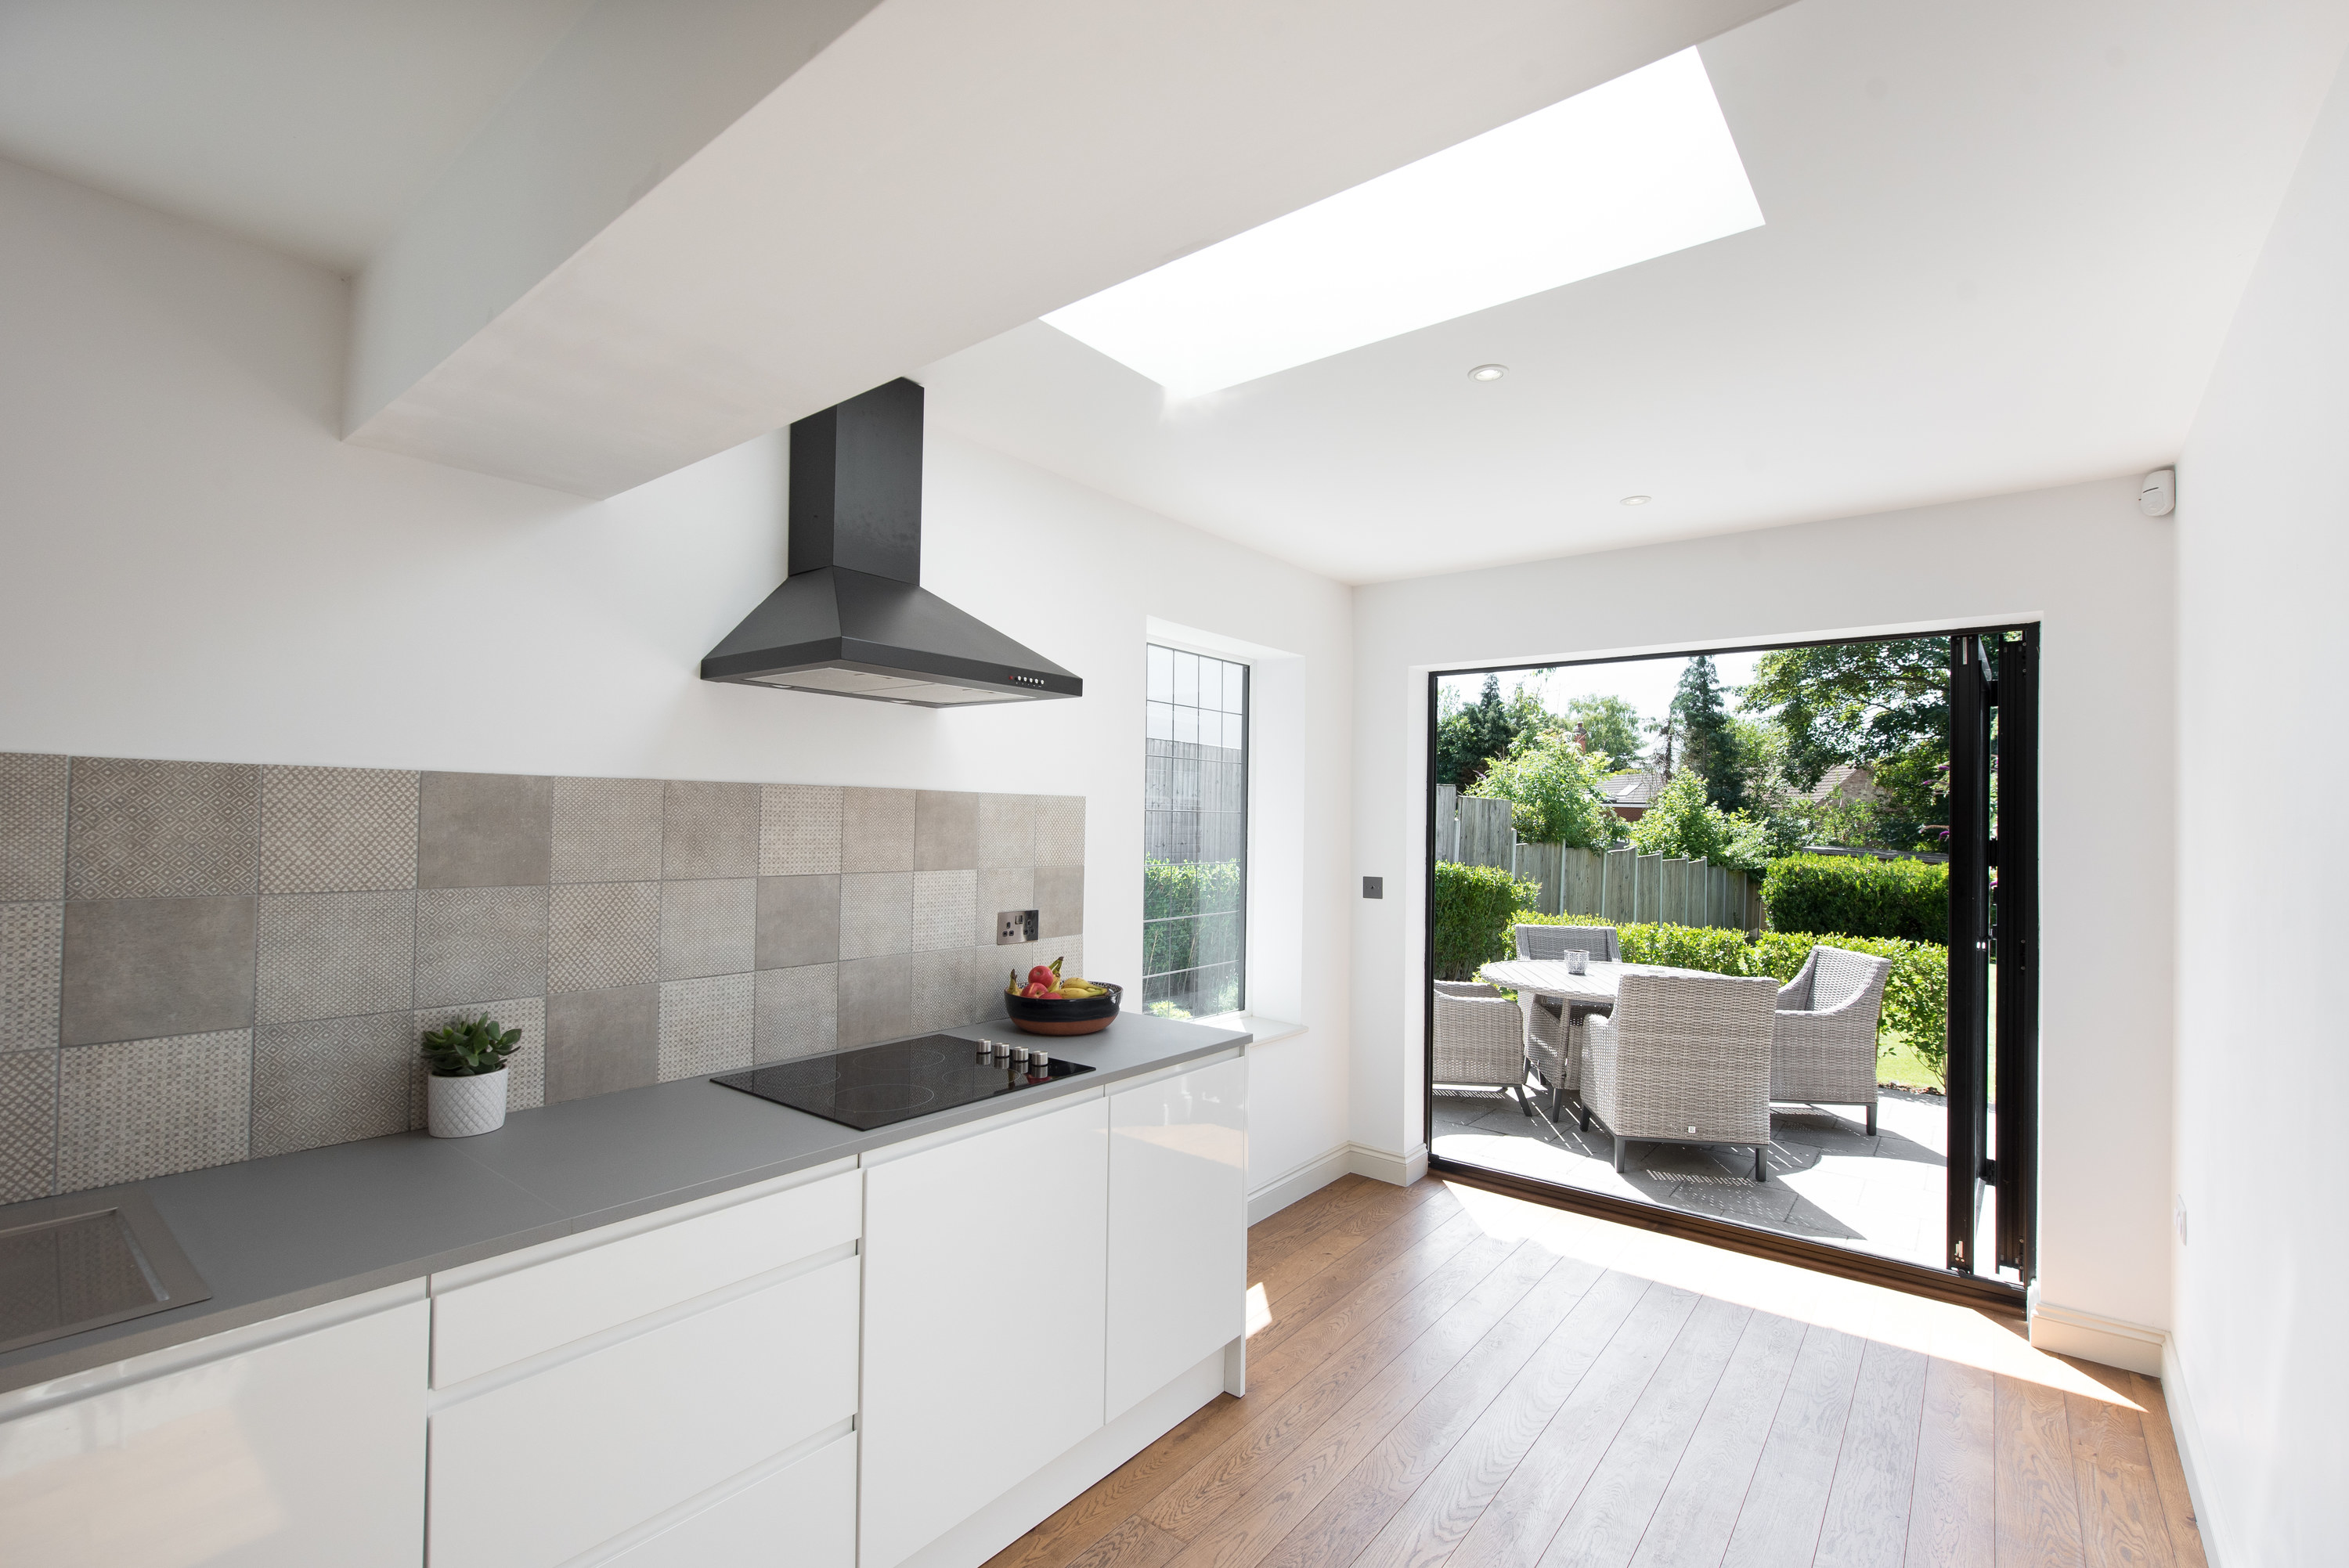 Large skylight over a modern, gray and white kitchen.